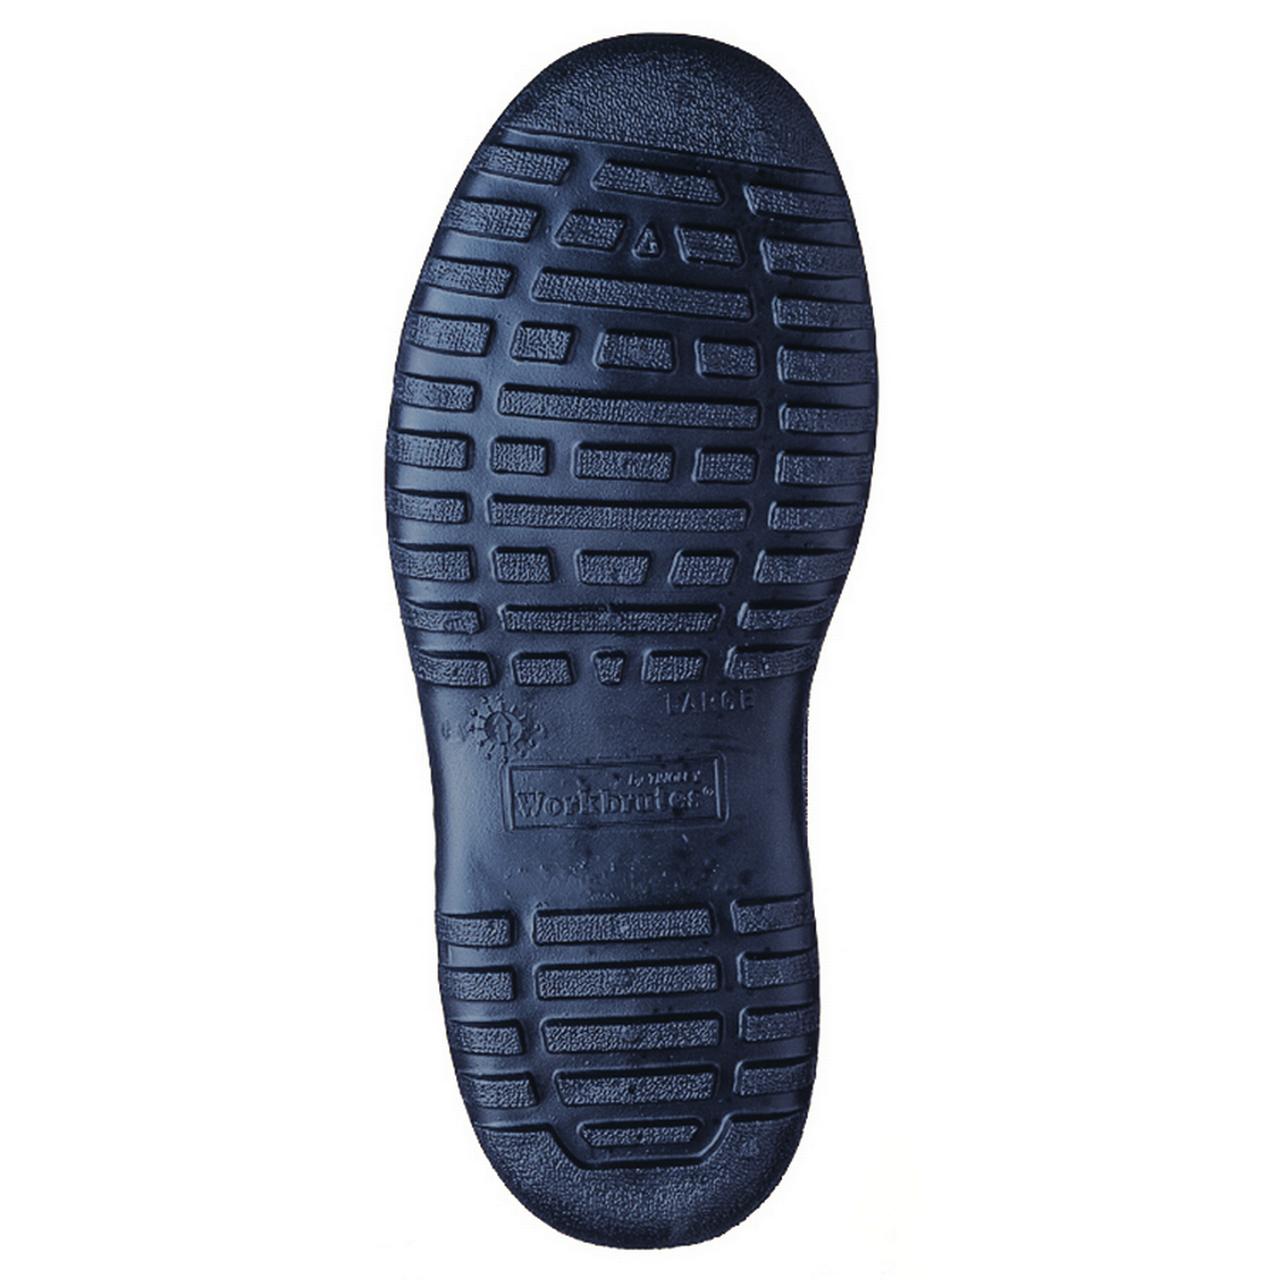 WORKBRUTES 35111.XS Hi-Top Overshoe Cleated Outsole PVC Boot, X-Small, Black - image 2 of 4